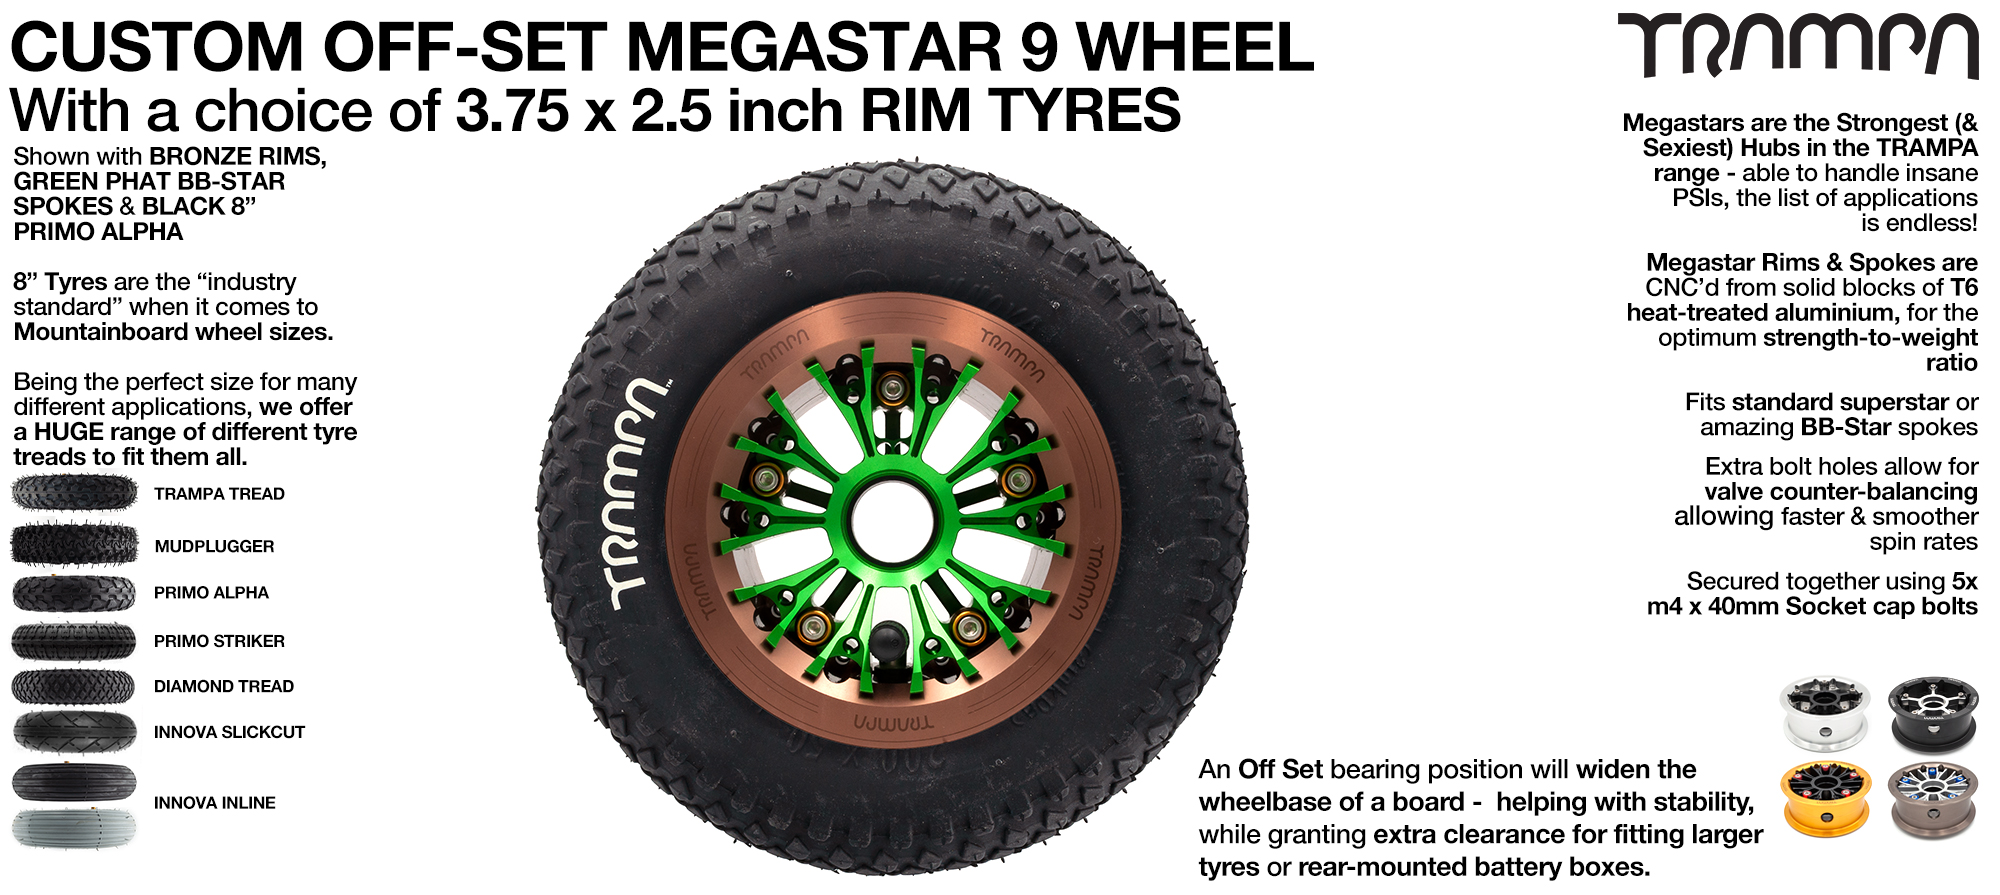 TRAMPA's OFF-SET MEGASTAR 9 hubs will also fit with any of the 3.75 inch rimmed 8 inch Tyres making them the widest 8 Inch wheel on the planet!!